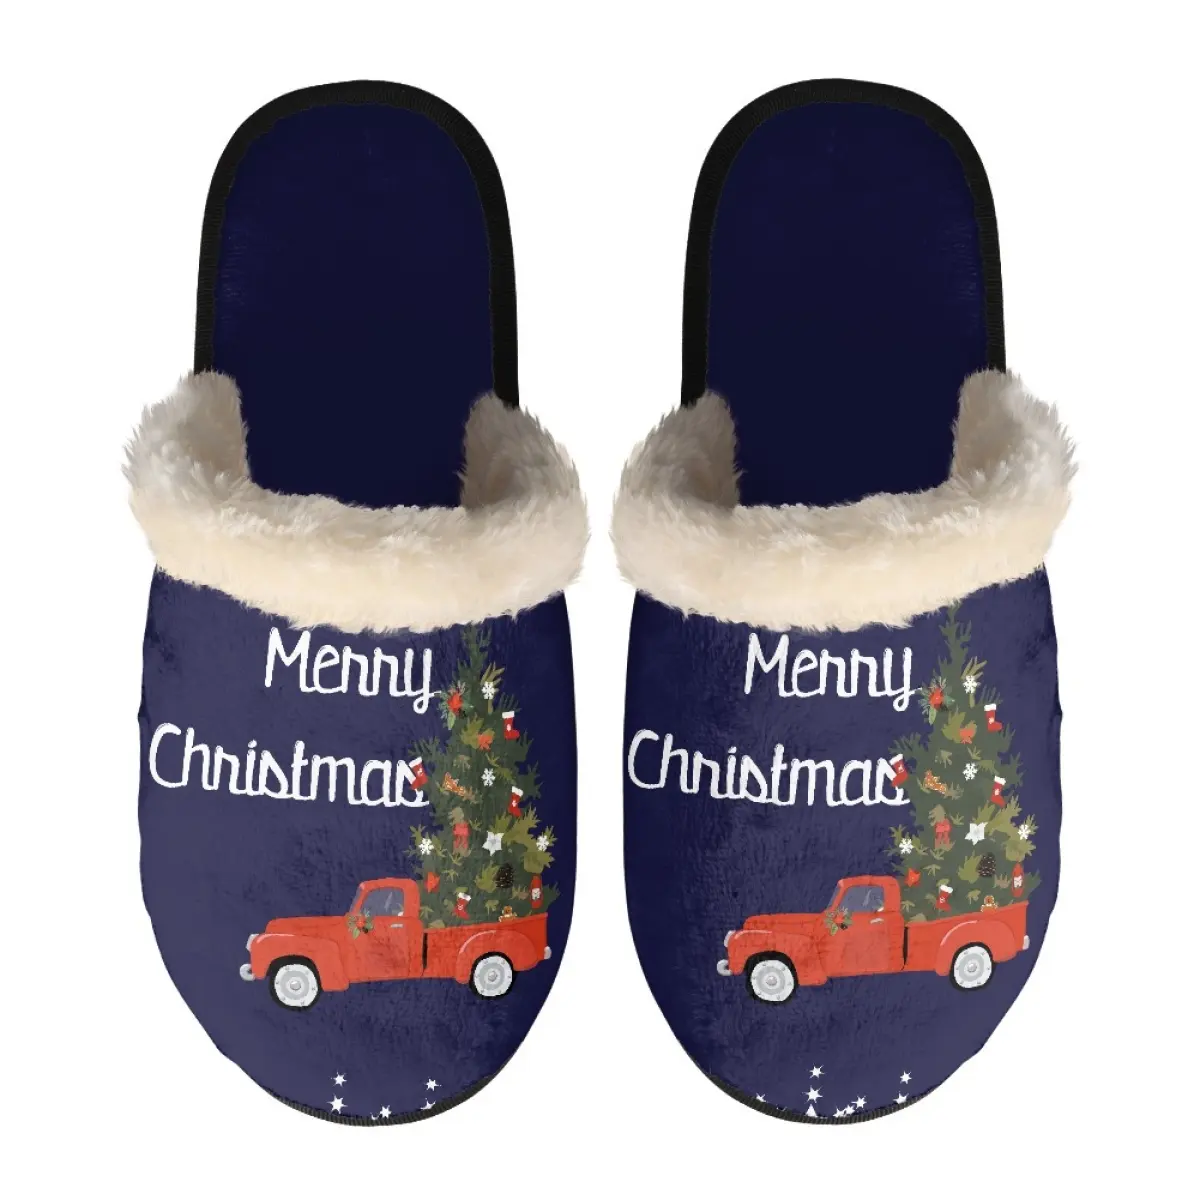 Merry Christmas Car Pine Tree Design Women's Cotton Slippers Winter Warm Soft Furry Slippers Cotton Shoes for Men Holiday Gifts